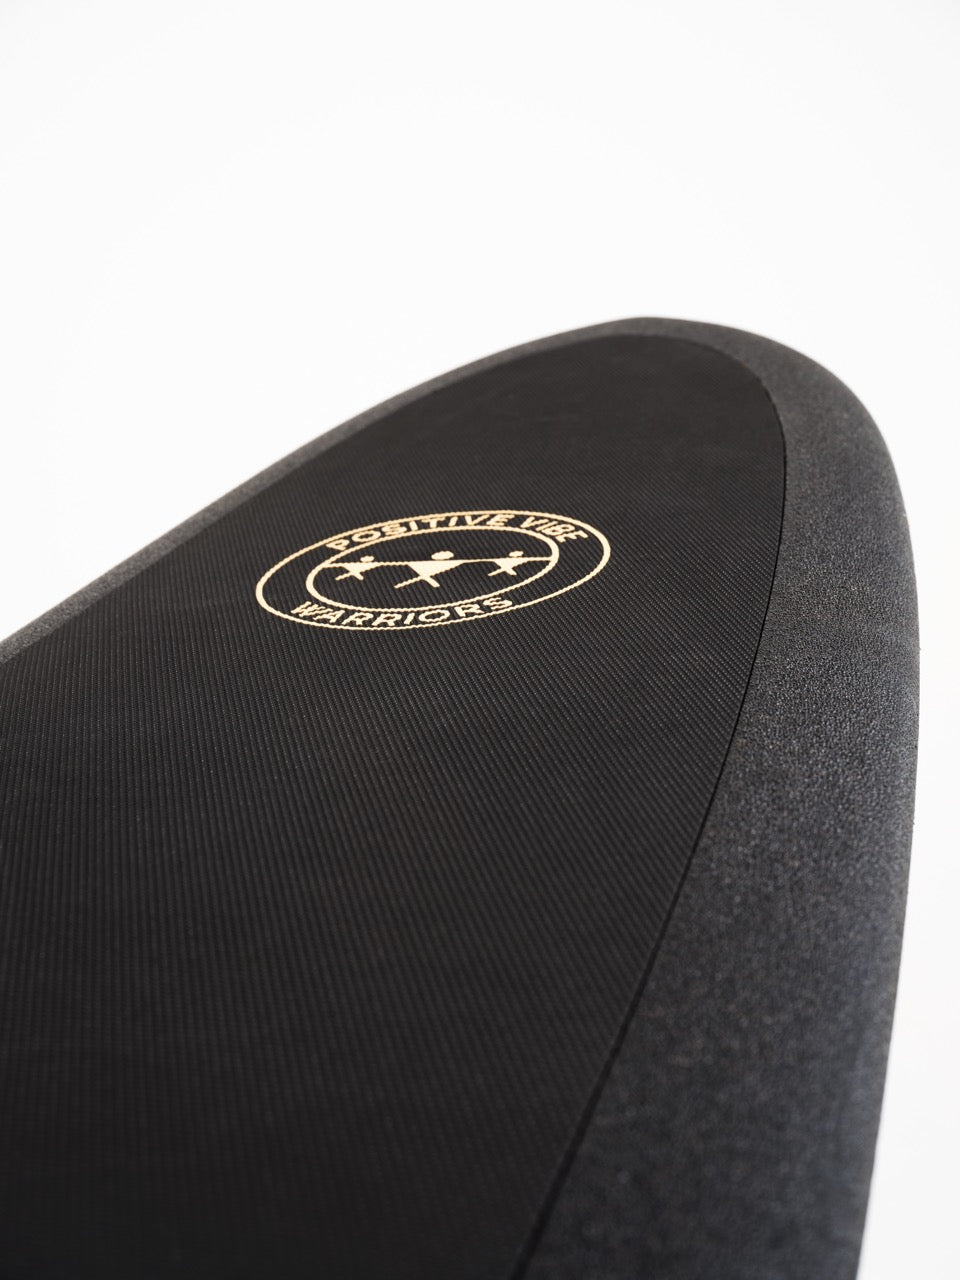 The front wax free deck pad of a black 8 foot Positive Vibe Warriors Scout surfboard with a logo on a white background